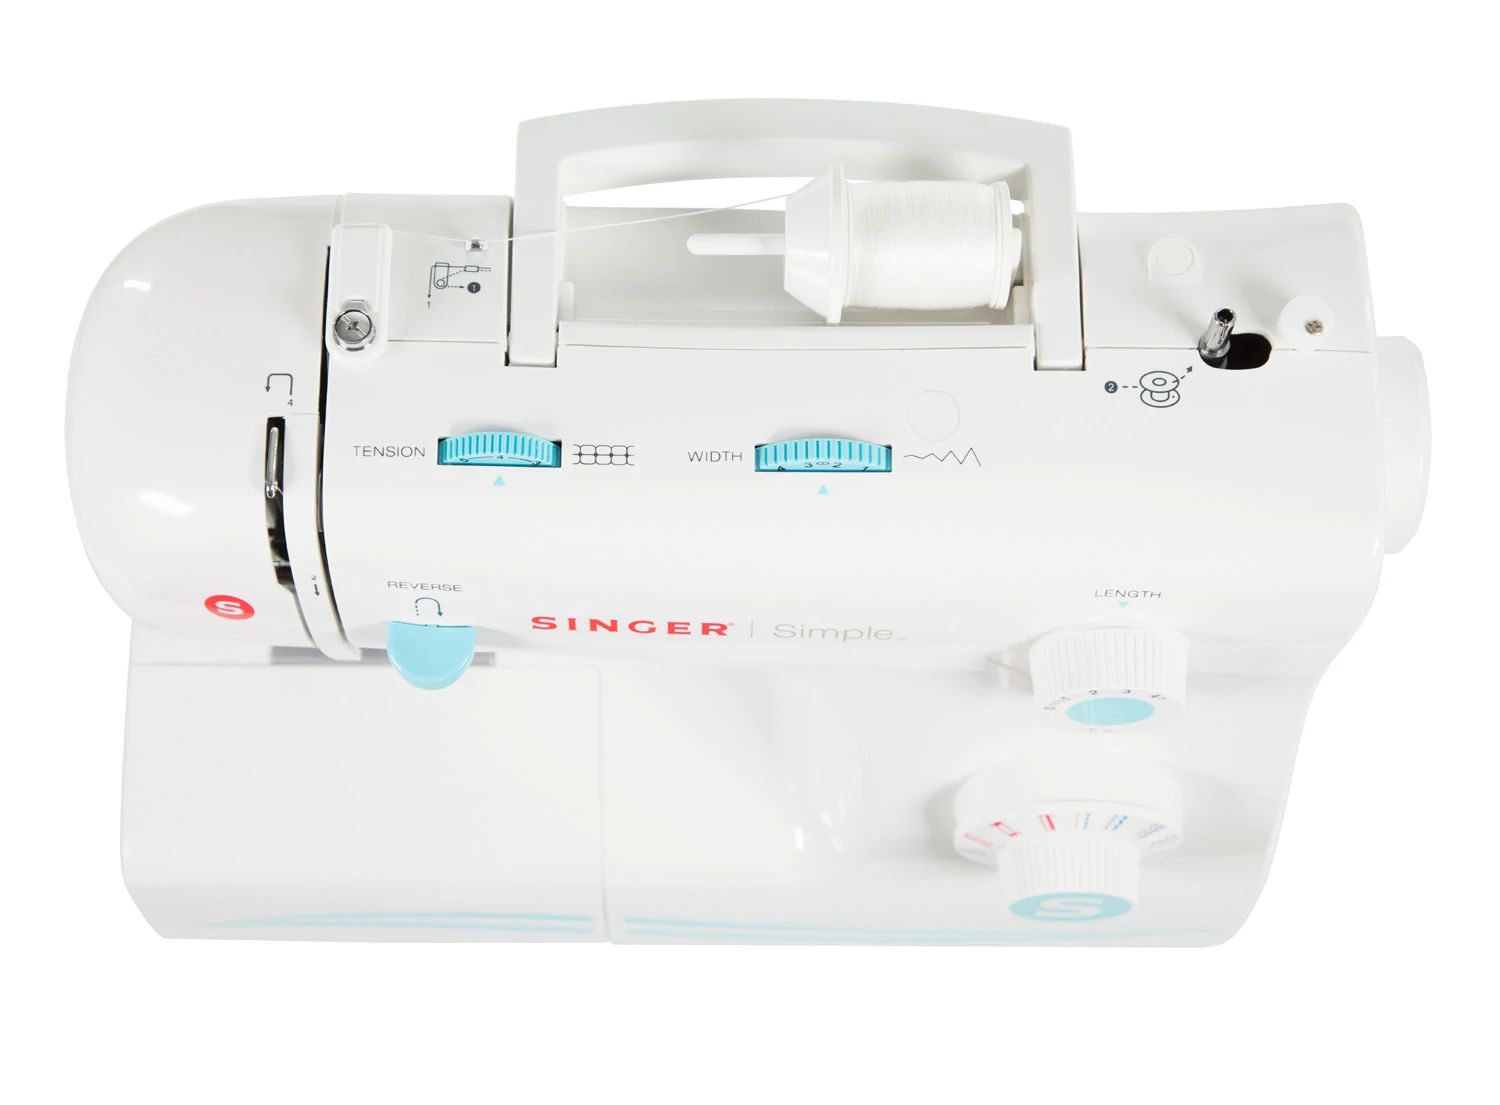 SINGER® Simple™ 2263 Sewing Machine with 97 Stitch Applications